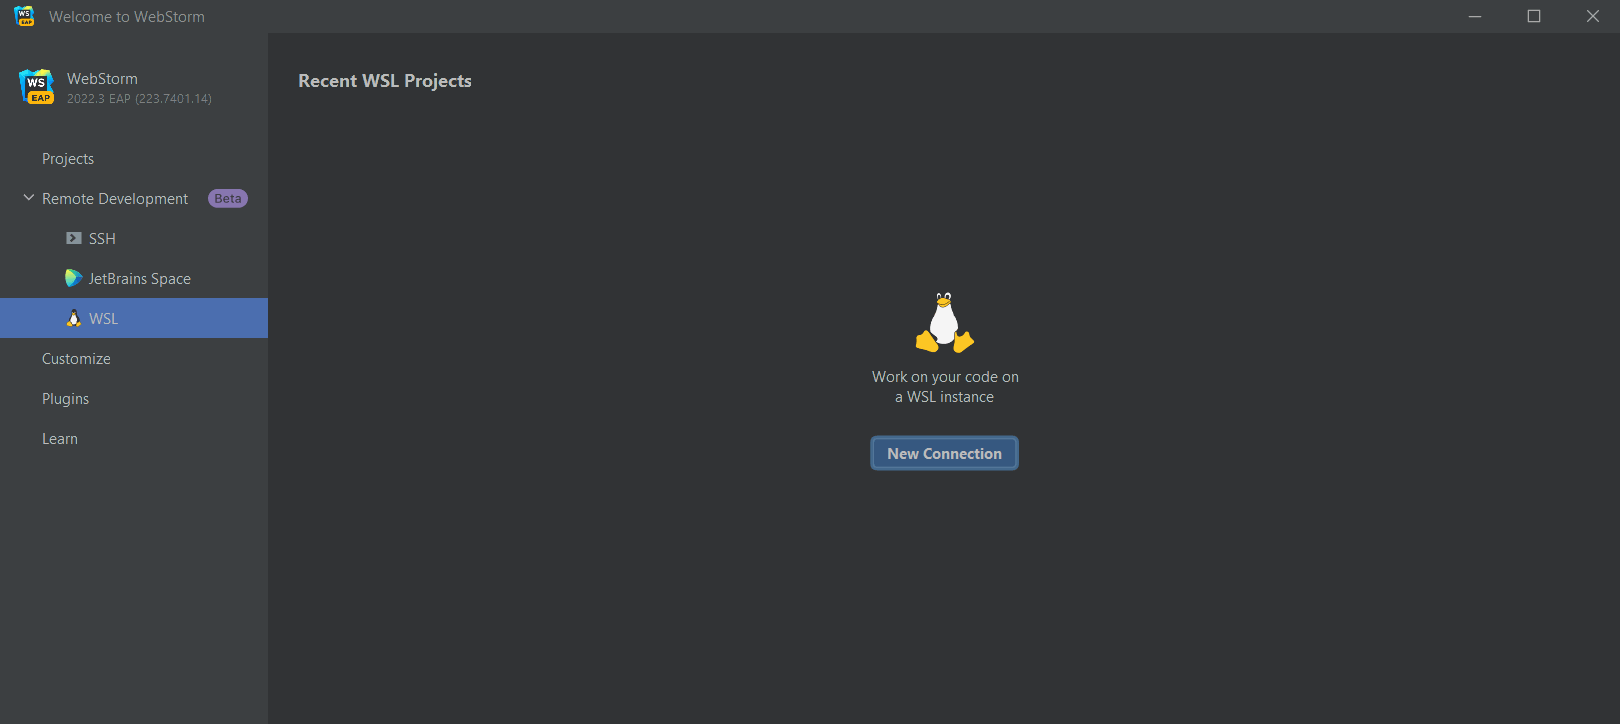 https://www.jetbrains.com/webstorm/whatsnew/img/2022.3/WSL2-projects-810@2x.png